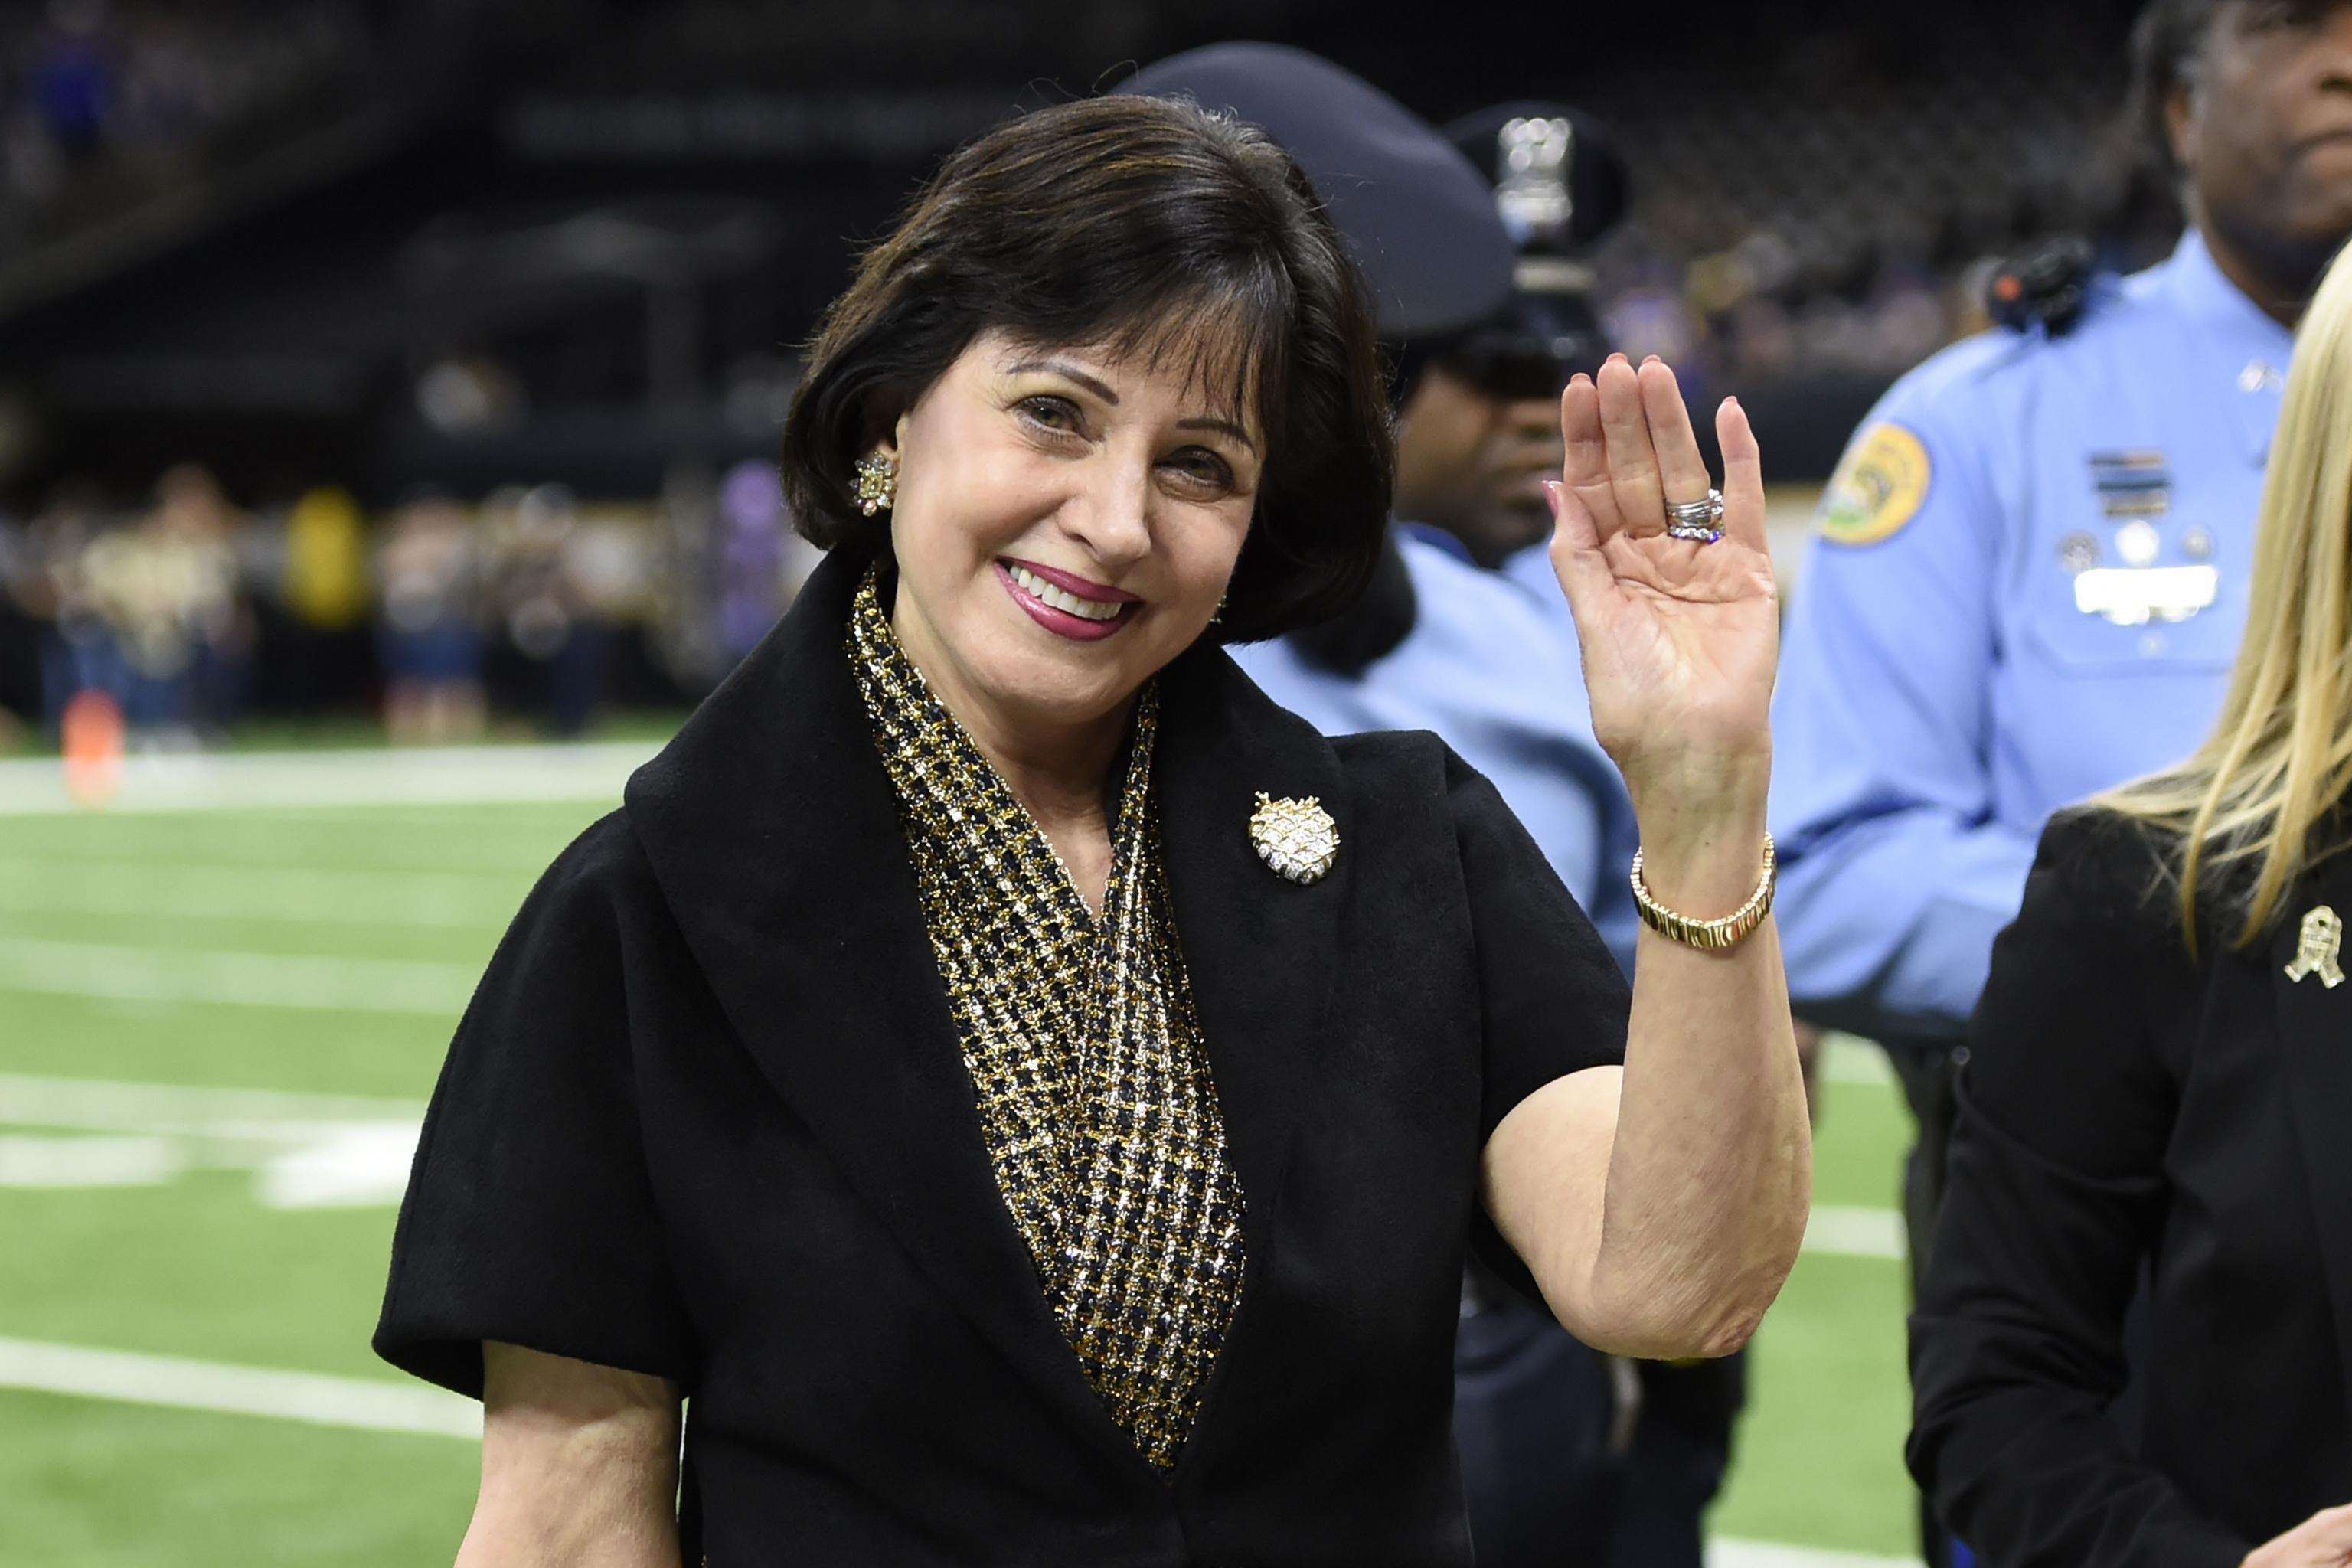 Saints Owner Gayle Benson to 'Aggressively Pursue' Changes After ...